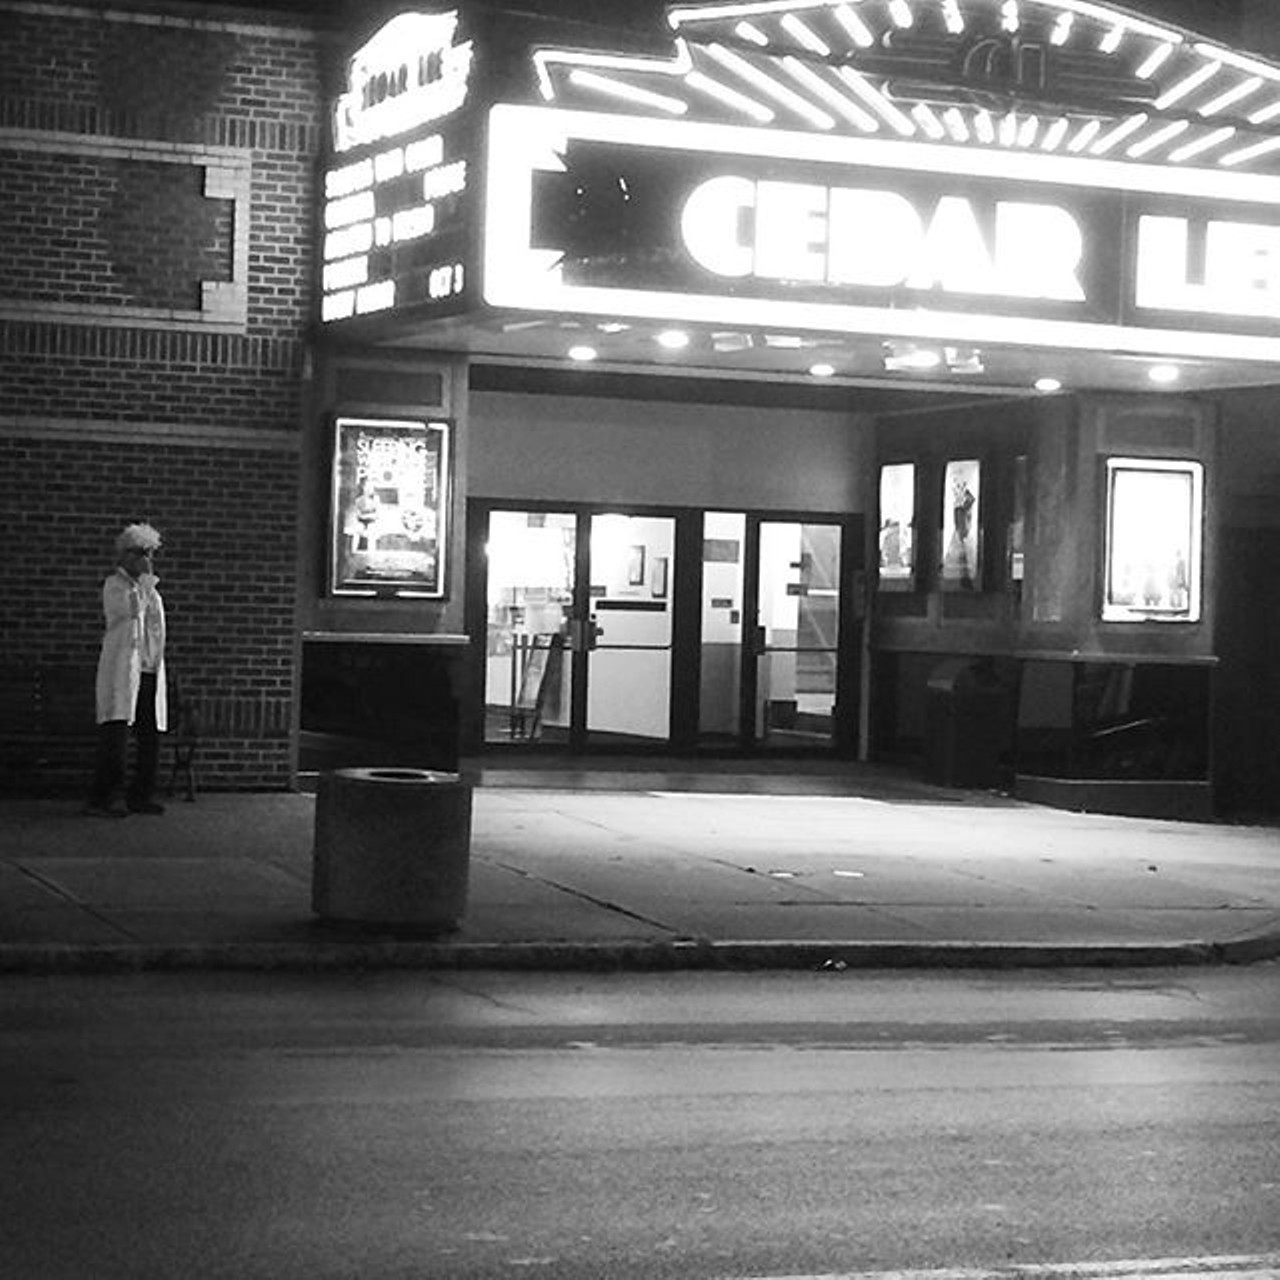 Movie Hop at the Cedar Lee
Relive young adult years with this for sure illegal date that we don&#146;t recommend. Plan a movie marathon by checking movie times online, making sure each film ends just as another begins. Then, buy a ticket to the first movie in the lineup and, once you&#146;re through the usher, hop throughout the night to the rest of the films on the list. It&#146;s so not legal, and we would never go for it. (Photo courtesy of Instagram user @ryan1pls1)